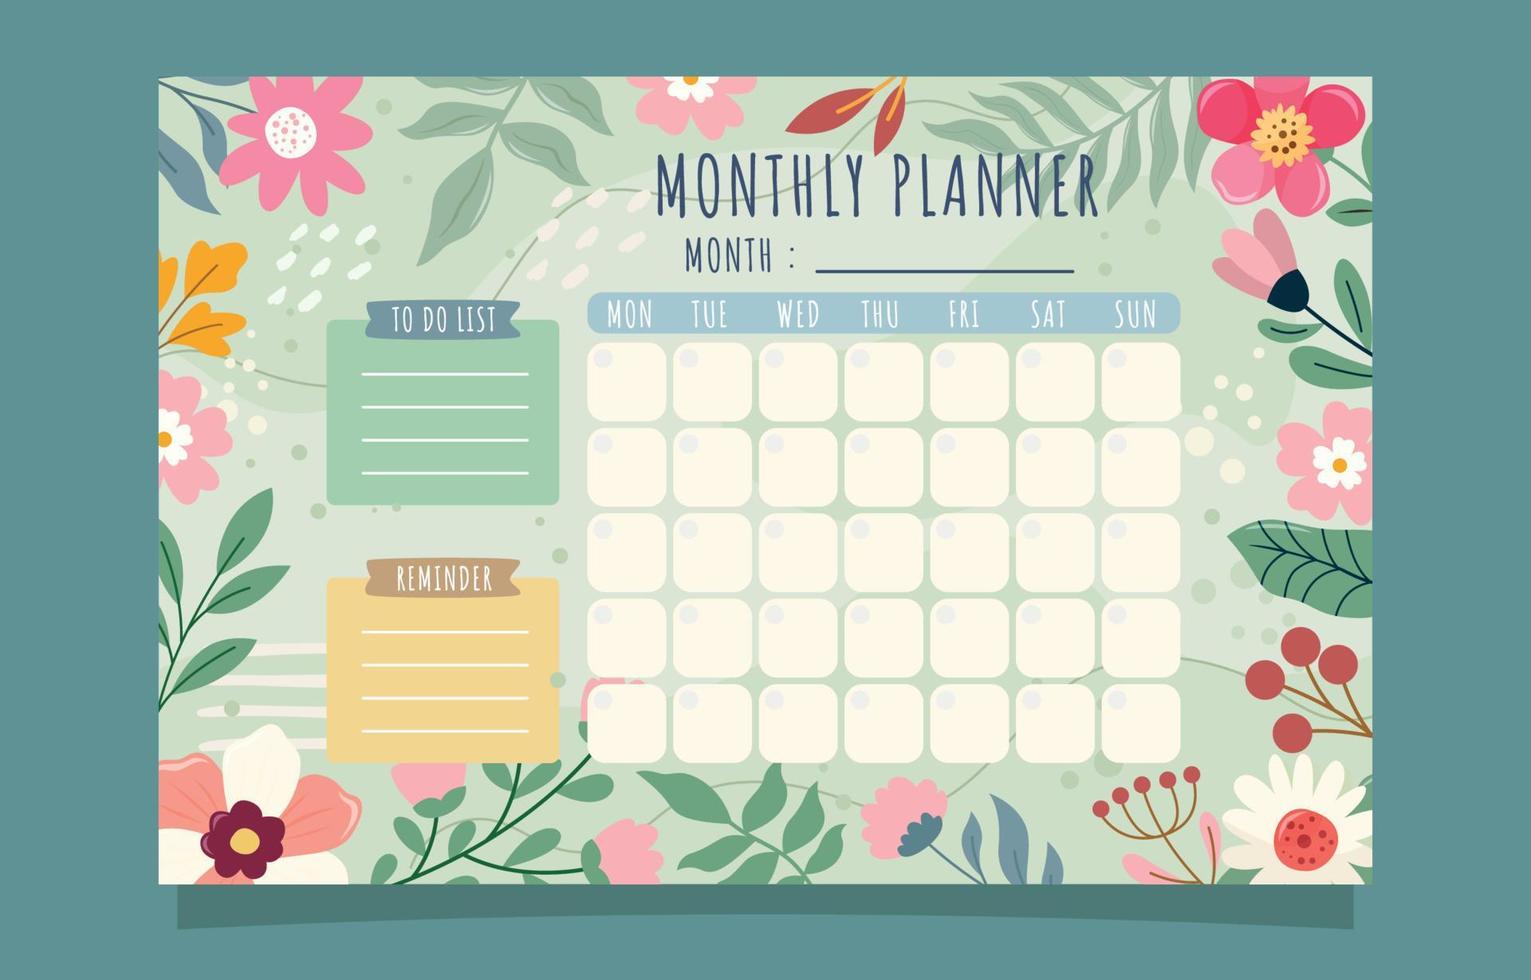 Monthly Planner Template in Boho Style Vector